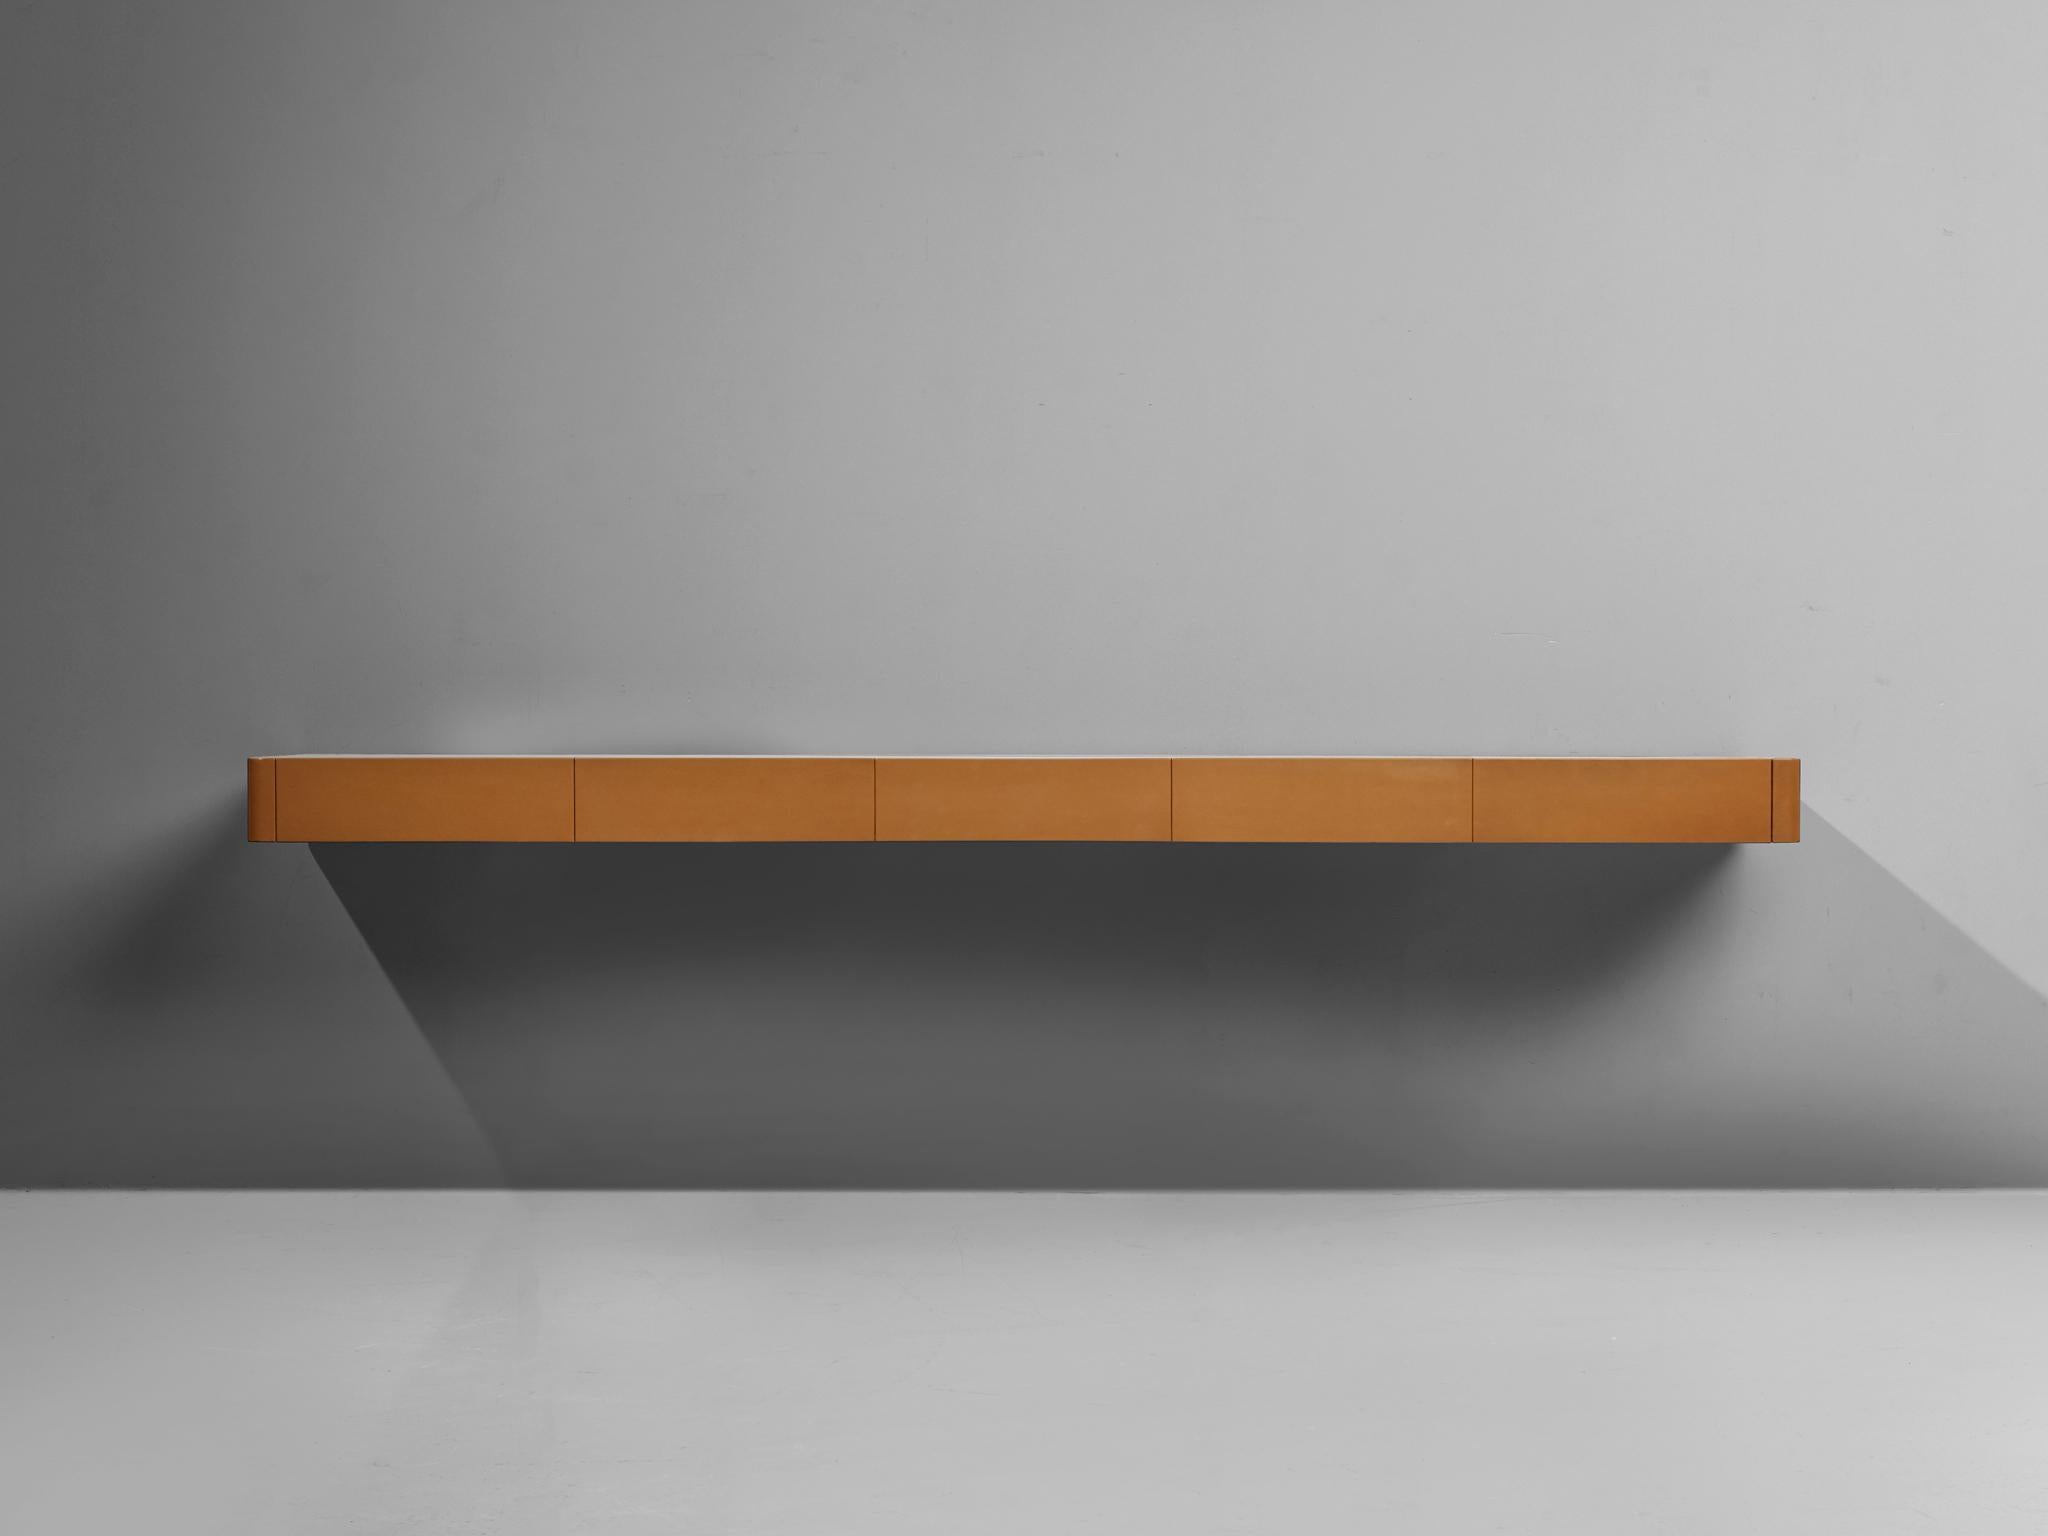 Osvaldo Borsani, M150 wall shelf, wood, leather, Italy, 1967

A wall shelf by the Italian designer Osvaldo Borsani. The design features rounded edges and is upholstered in cognac leather with a wooden tabletop. It has five hidden drawers. Remarkable